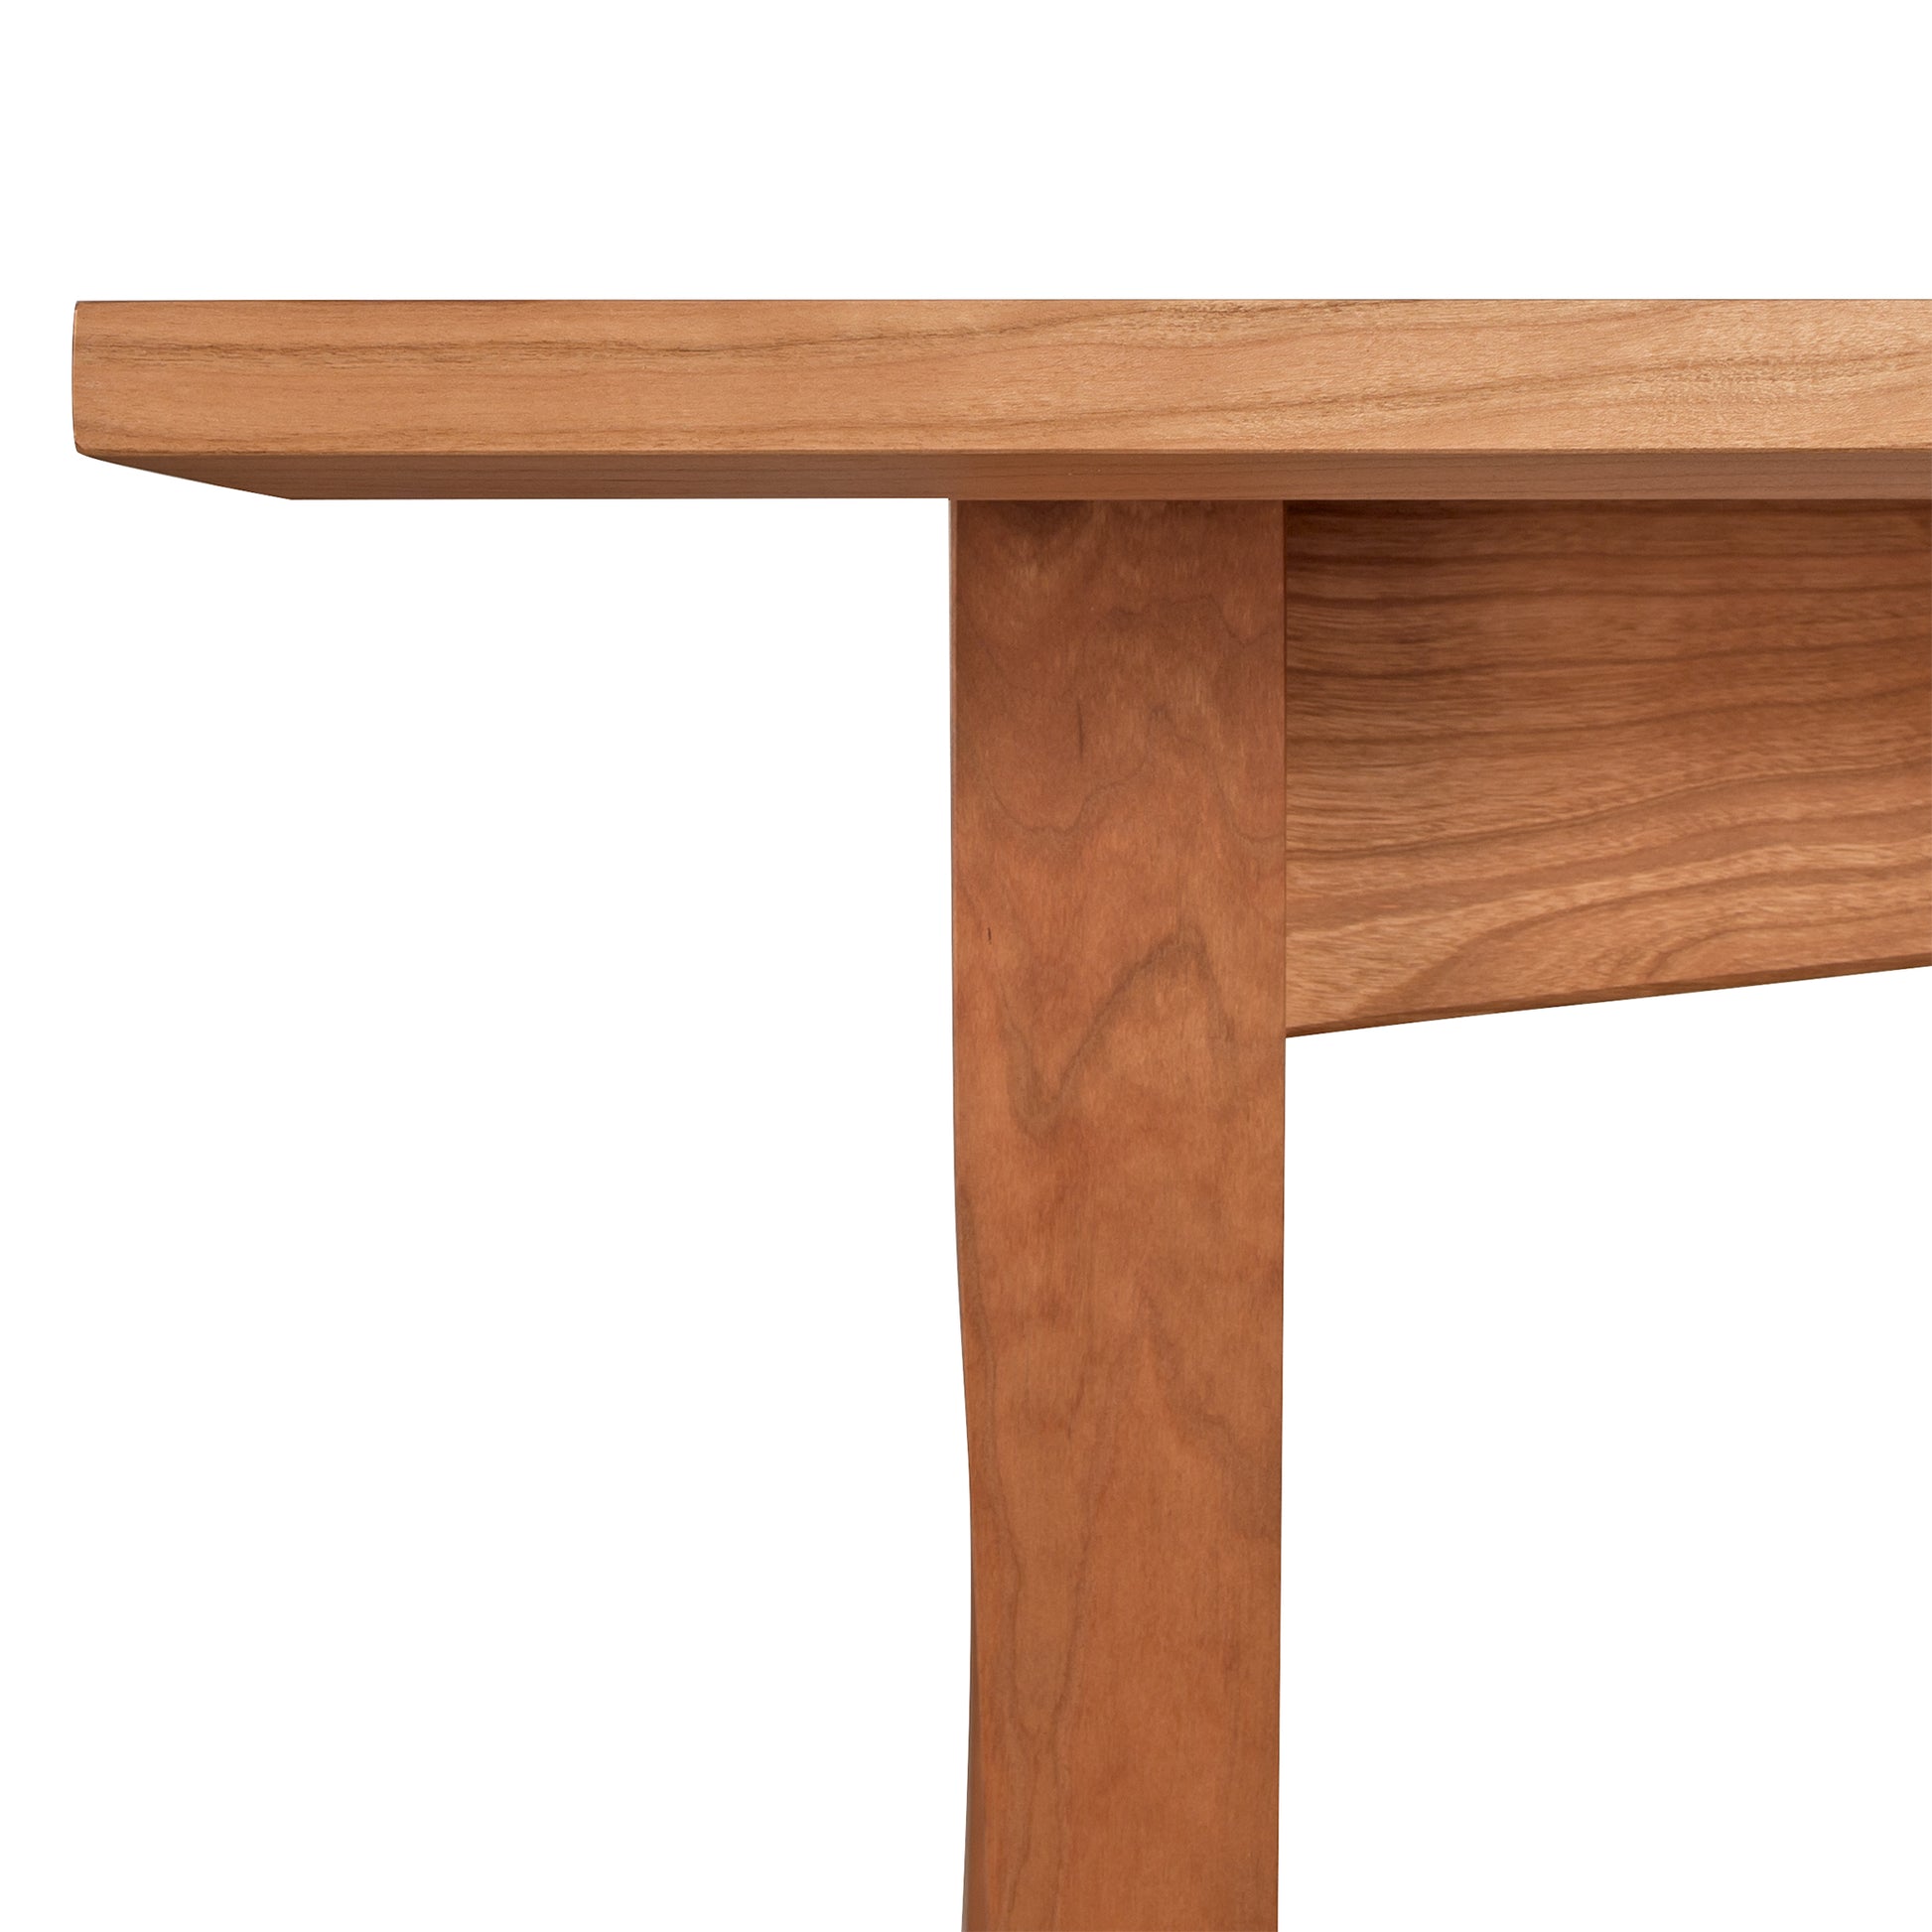 Close-up of a Maple Corner Woodworks American Shaker Rectangular Solid Top Table showing a section of the tabletop and a supporting leg, highlighting the natural wood grain and smooth finish.